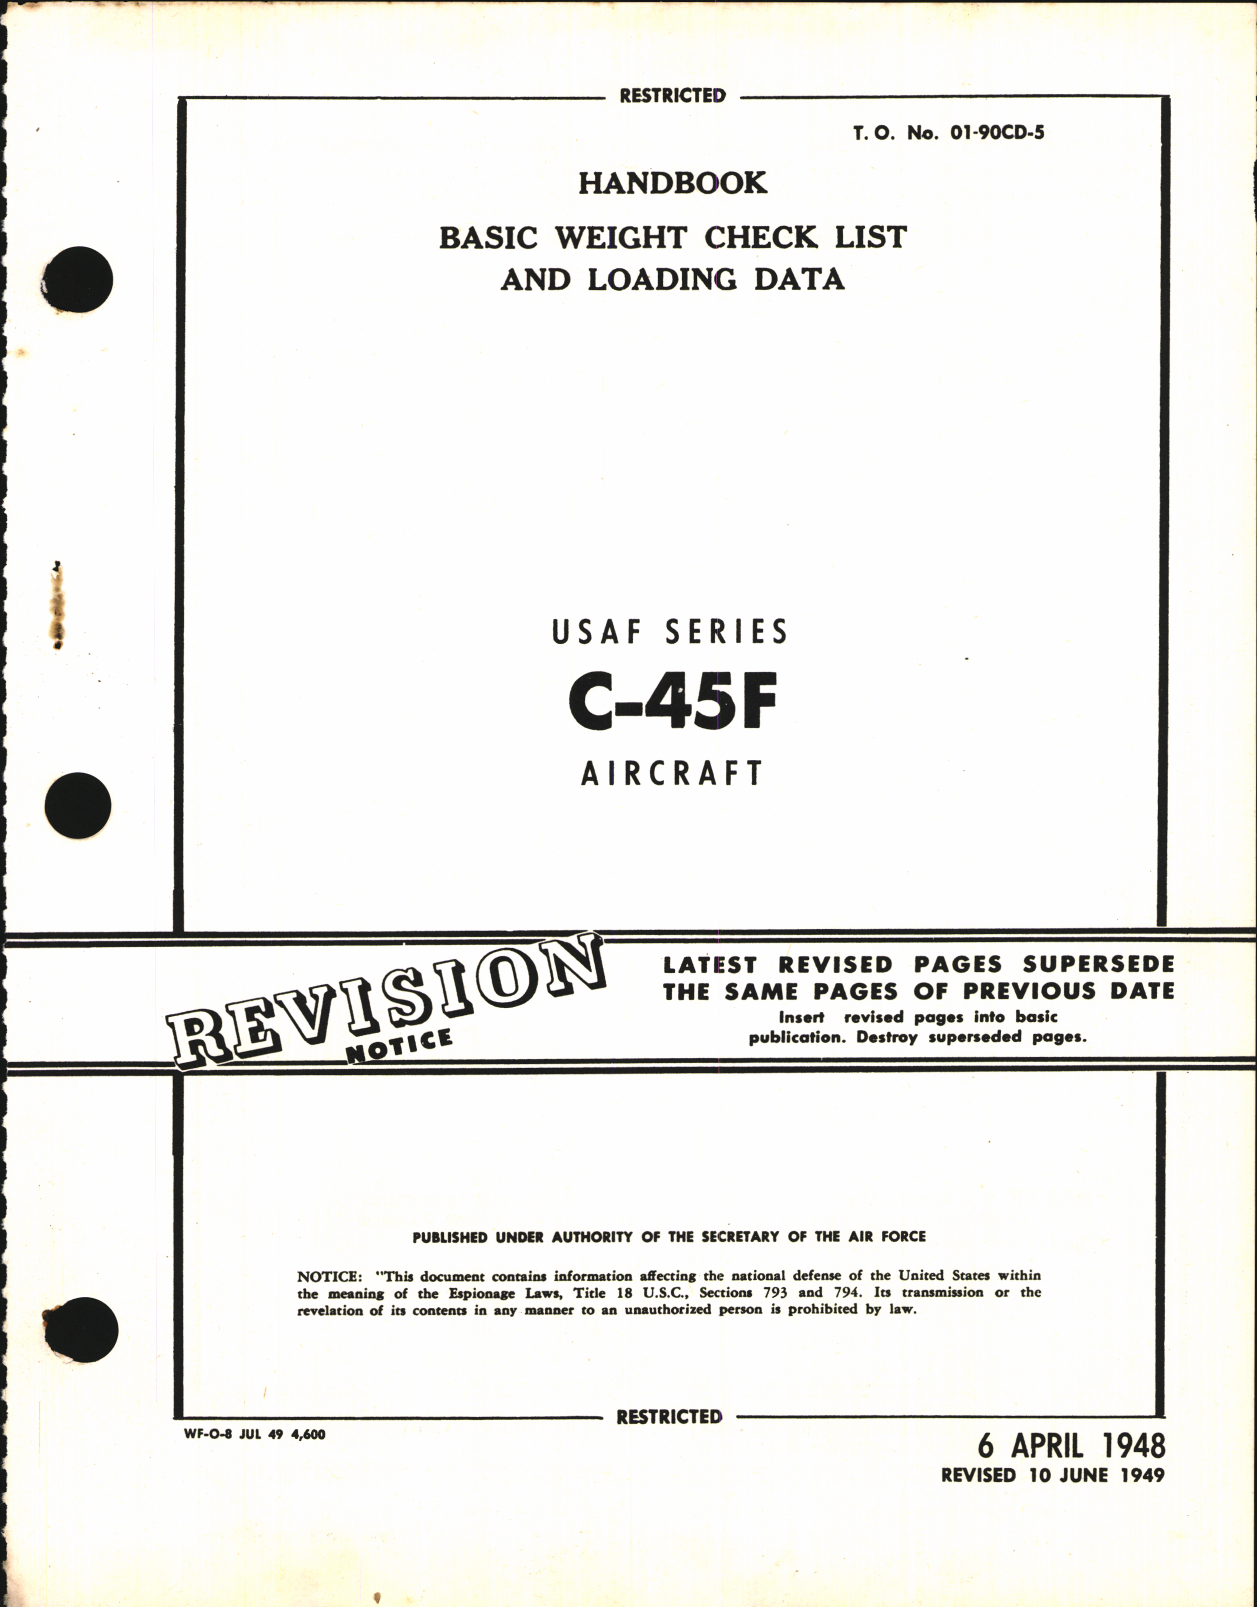 Sample page 1 from AirCorps Library document: Basic Weight Check List and Loading Data for C-45F